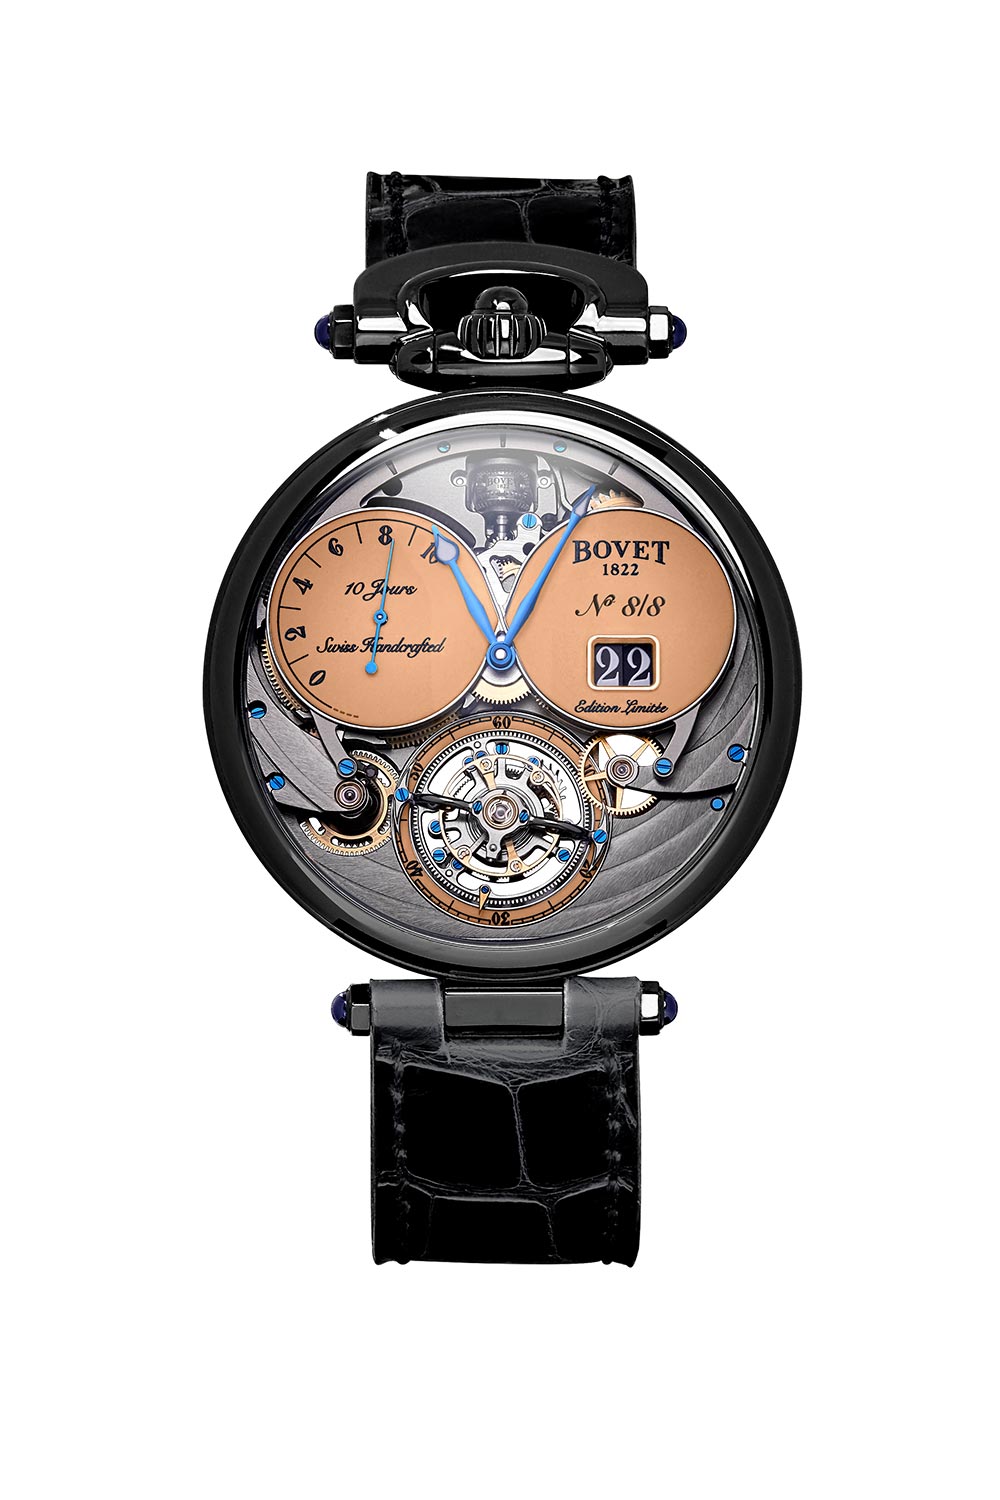 virtuoso viii chapter two commodity picture - BOVET Virtuoso VIII Chapter Two 陀飞轮腕表 崭新面貌惊艳眼前！